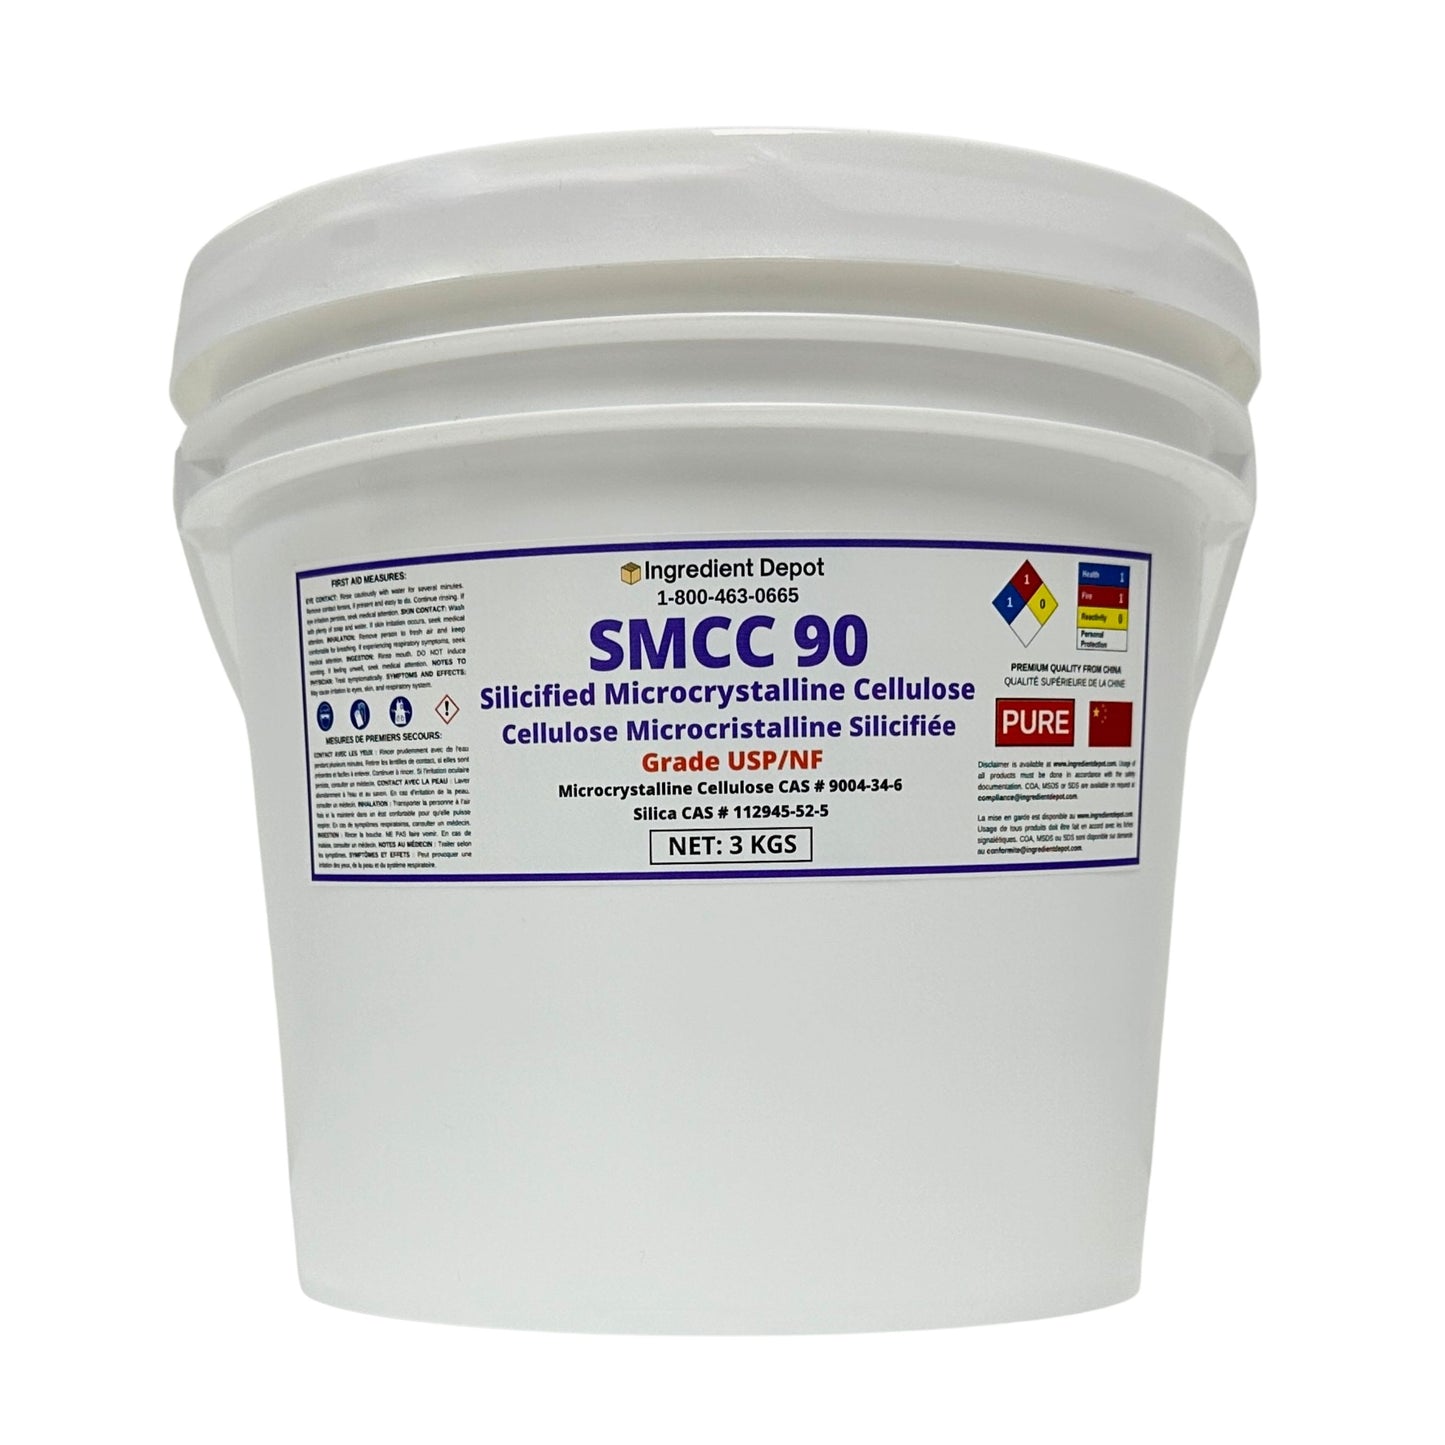 SMCC 90 Silicified Microcrystalline Cellulose - USP/NF Grade 3 kgs - Ingredient Depot